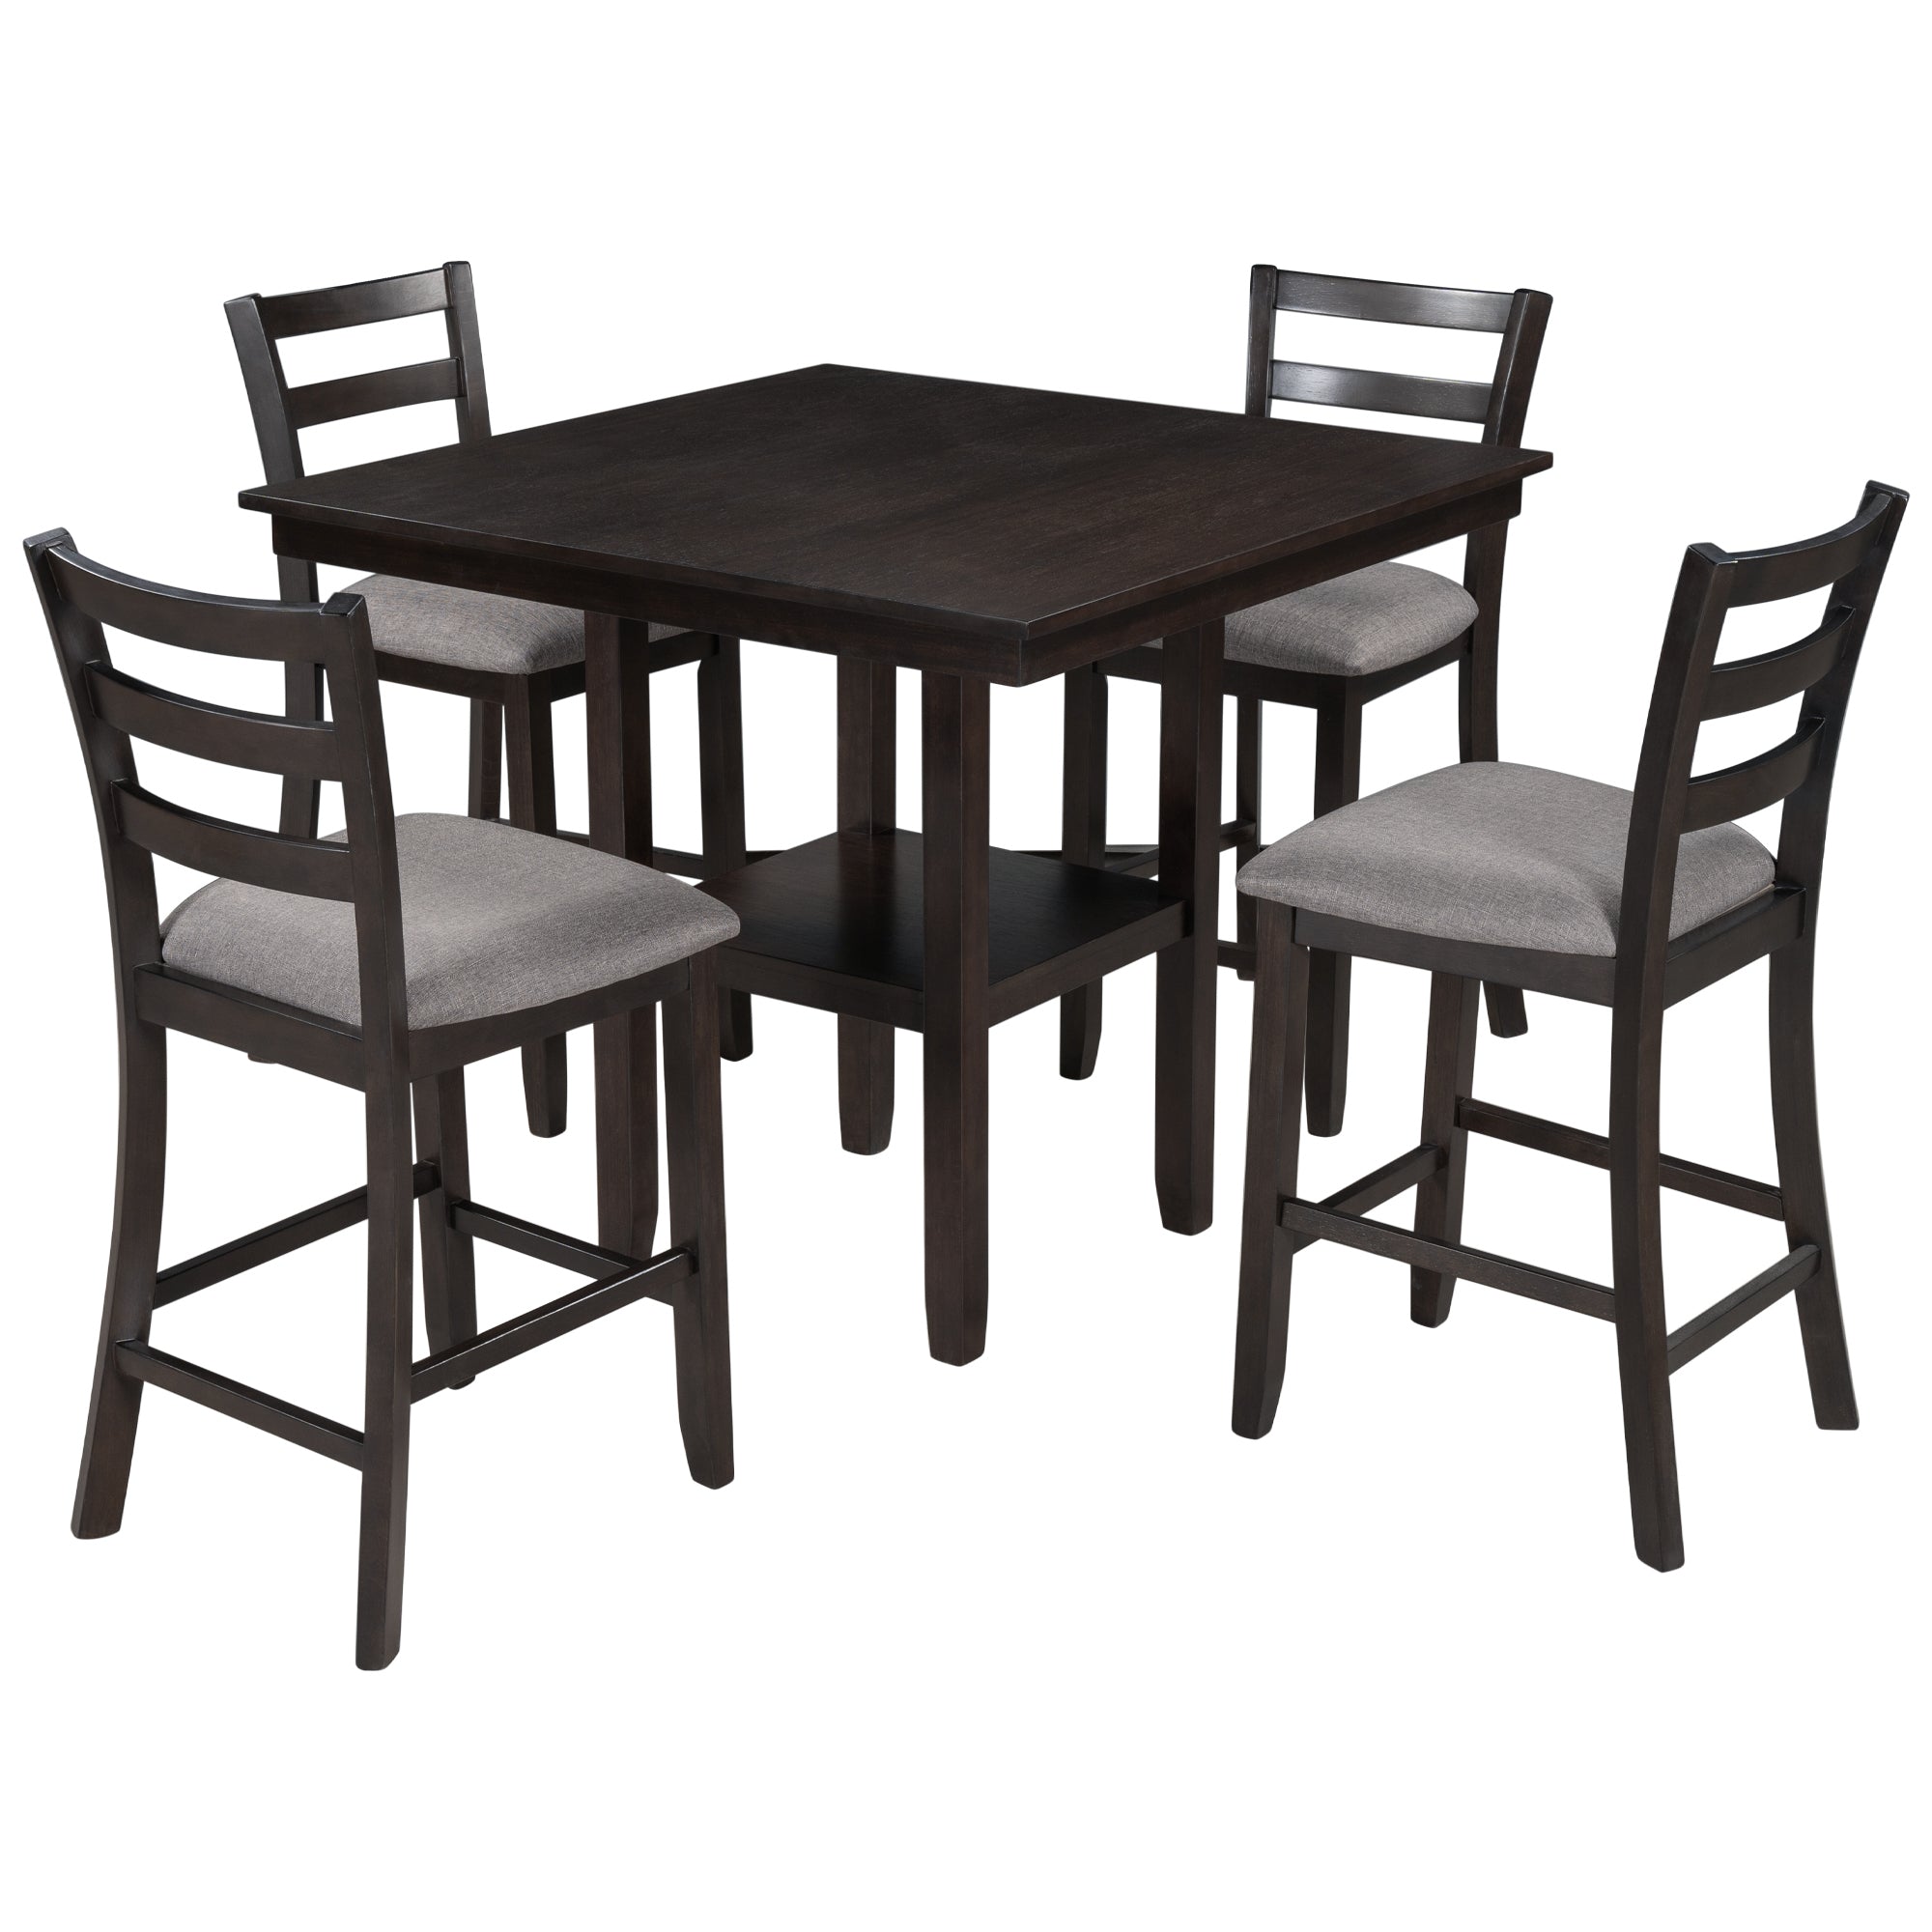 5-Piece Wooden Counter Height Dining Set with Padded Chairs and Storage Shelving-Boyel Living